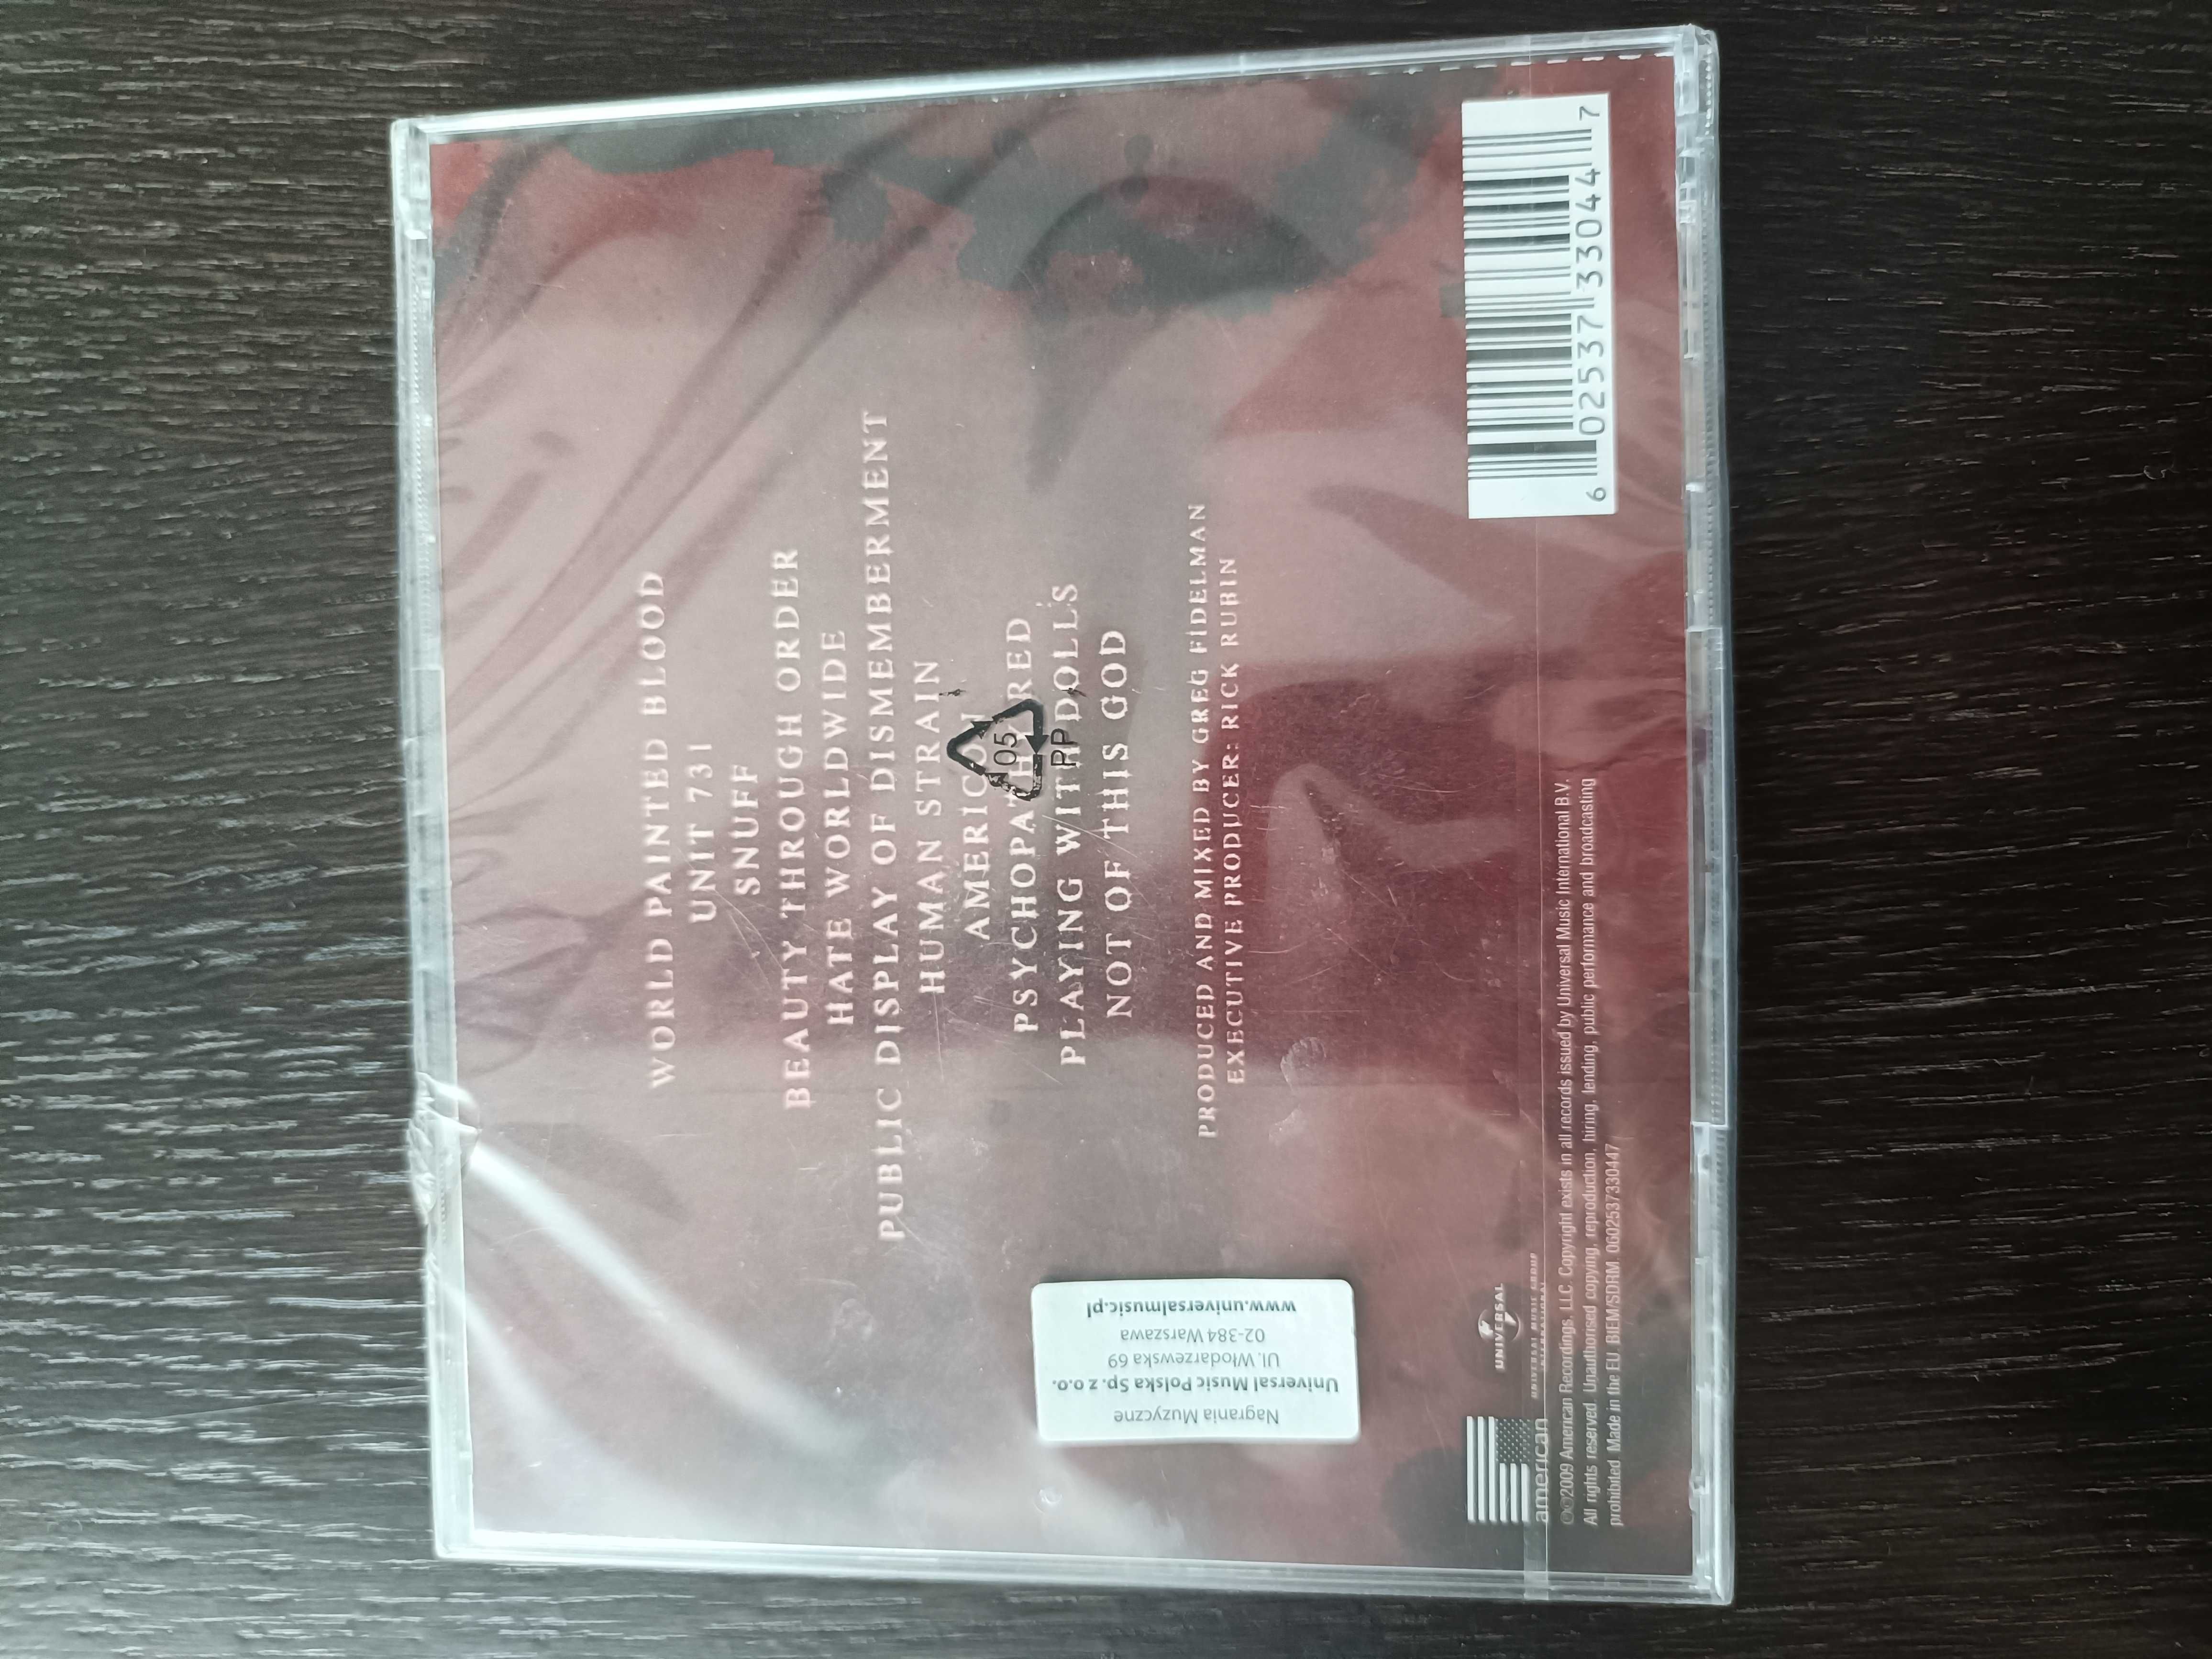 Slayer world painted blood cd